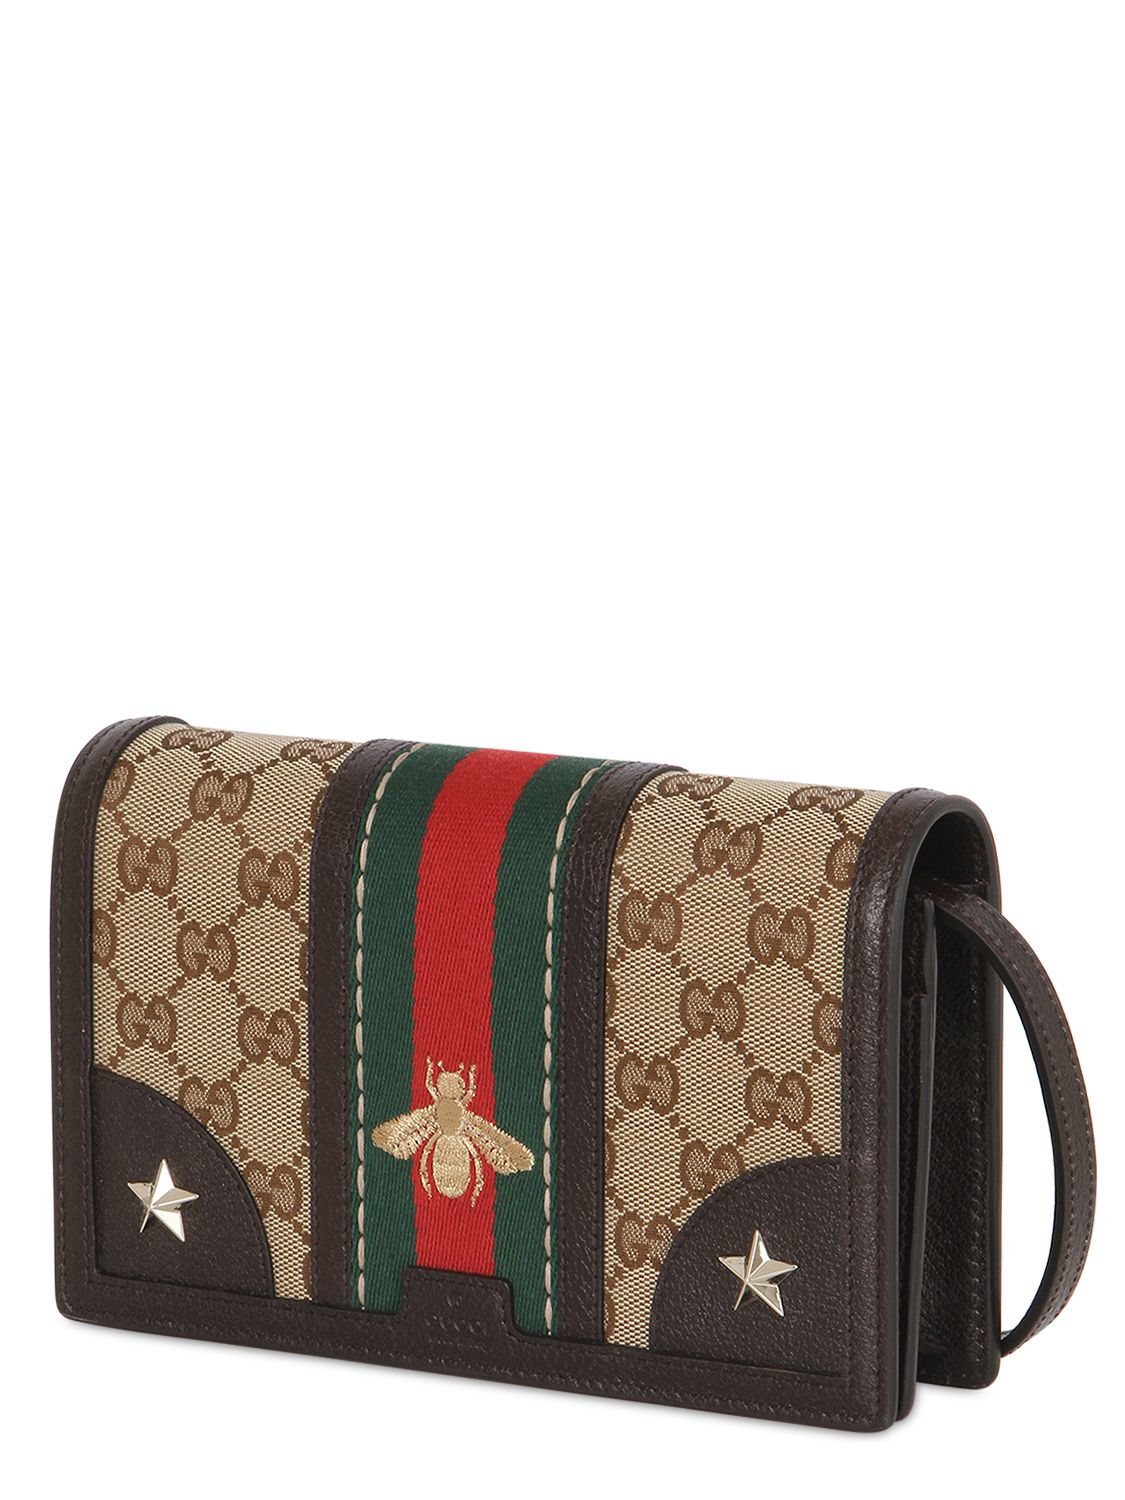 Gucci GG Supreme Bee-Embroidered Canvas Bag in Beige/Brown (Brown) - Lyst